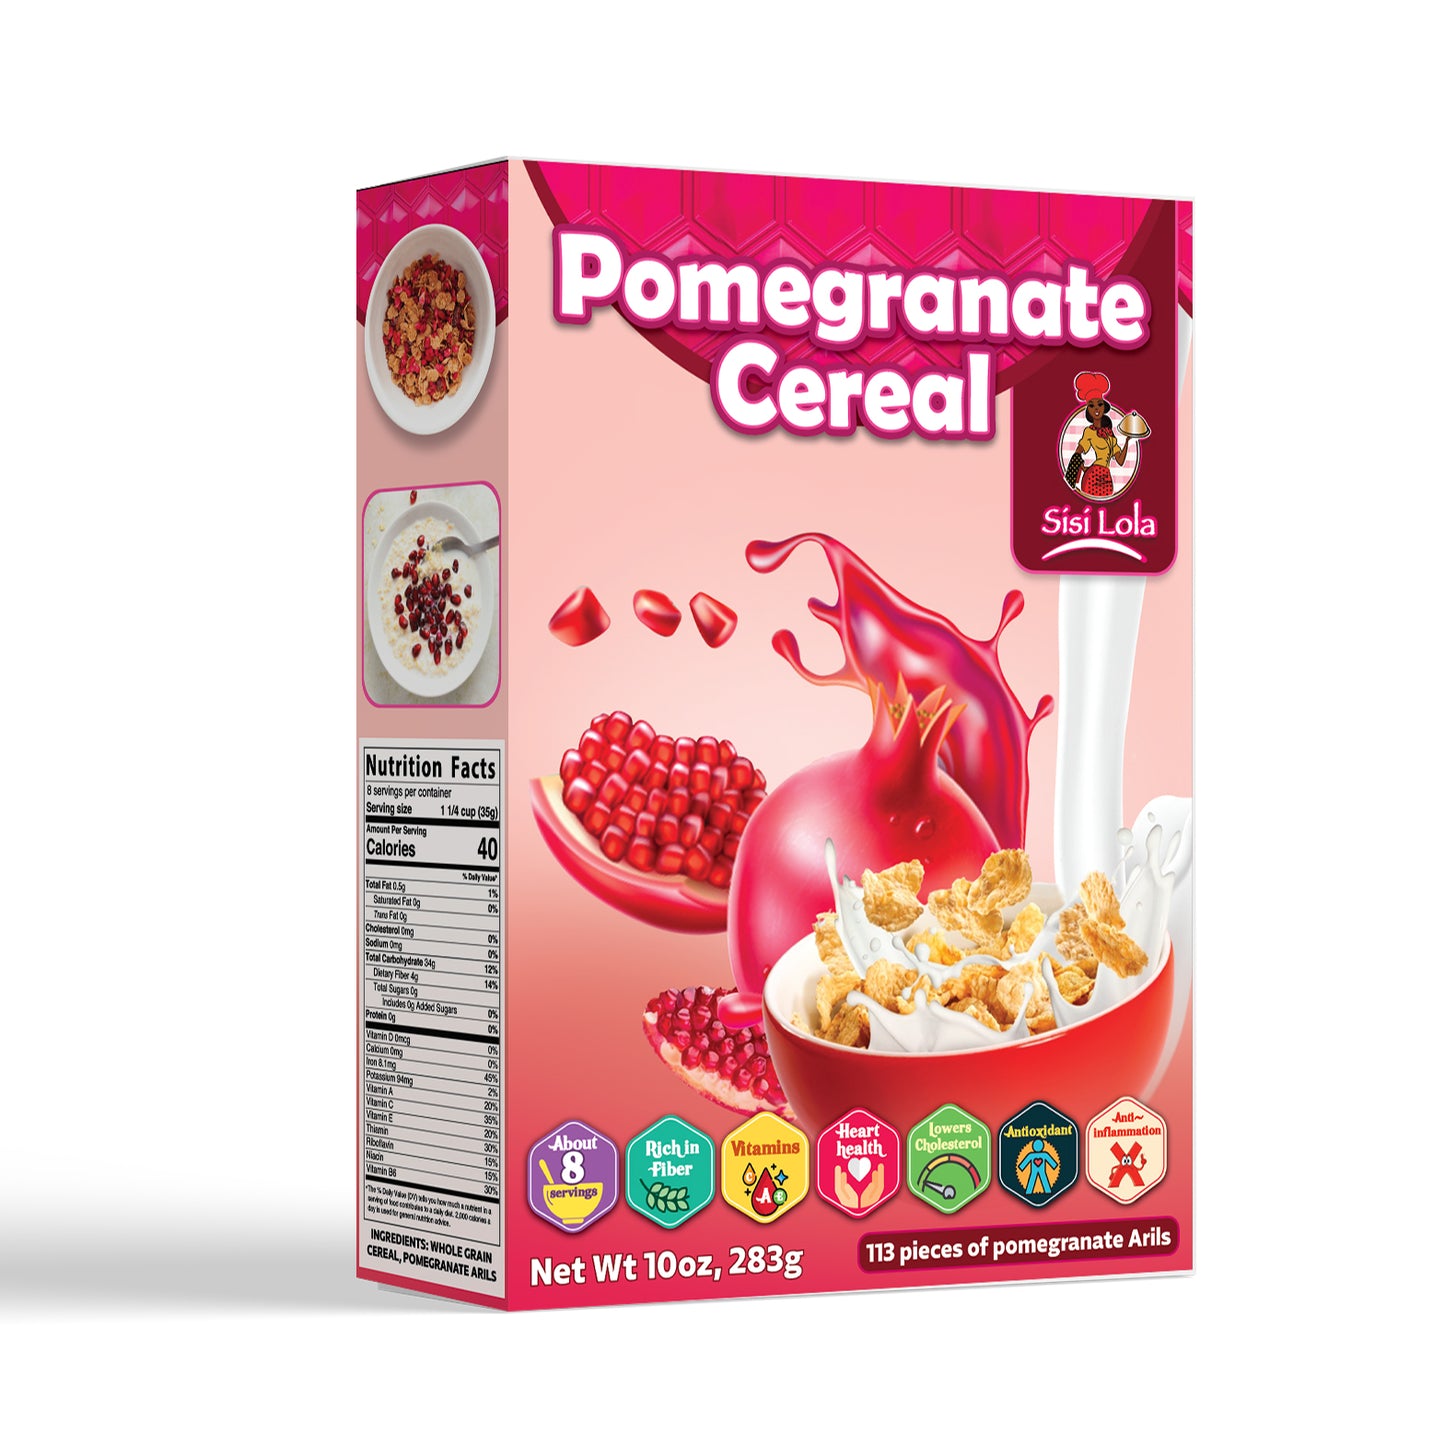 Pomegranate Cereal